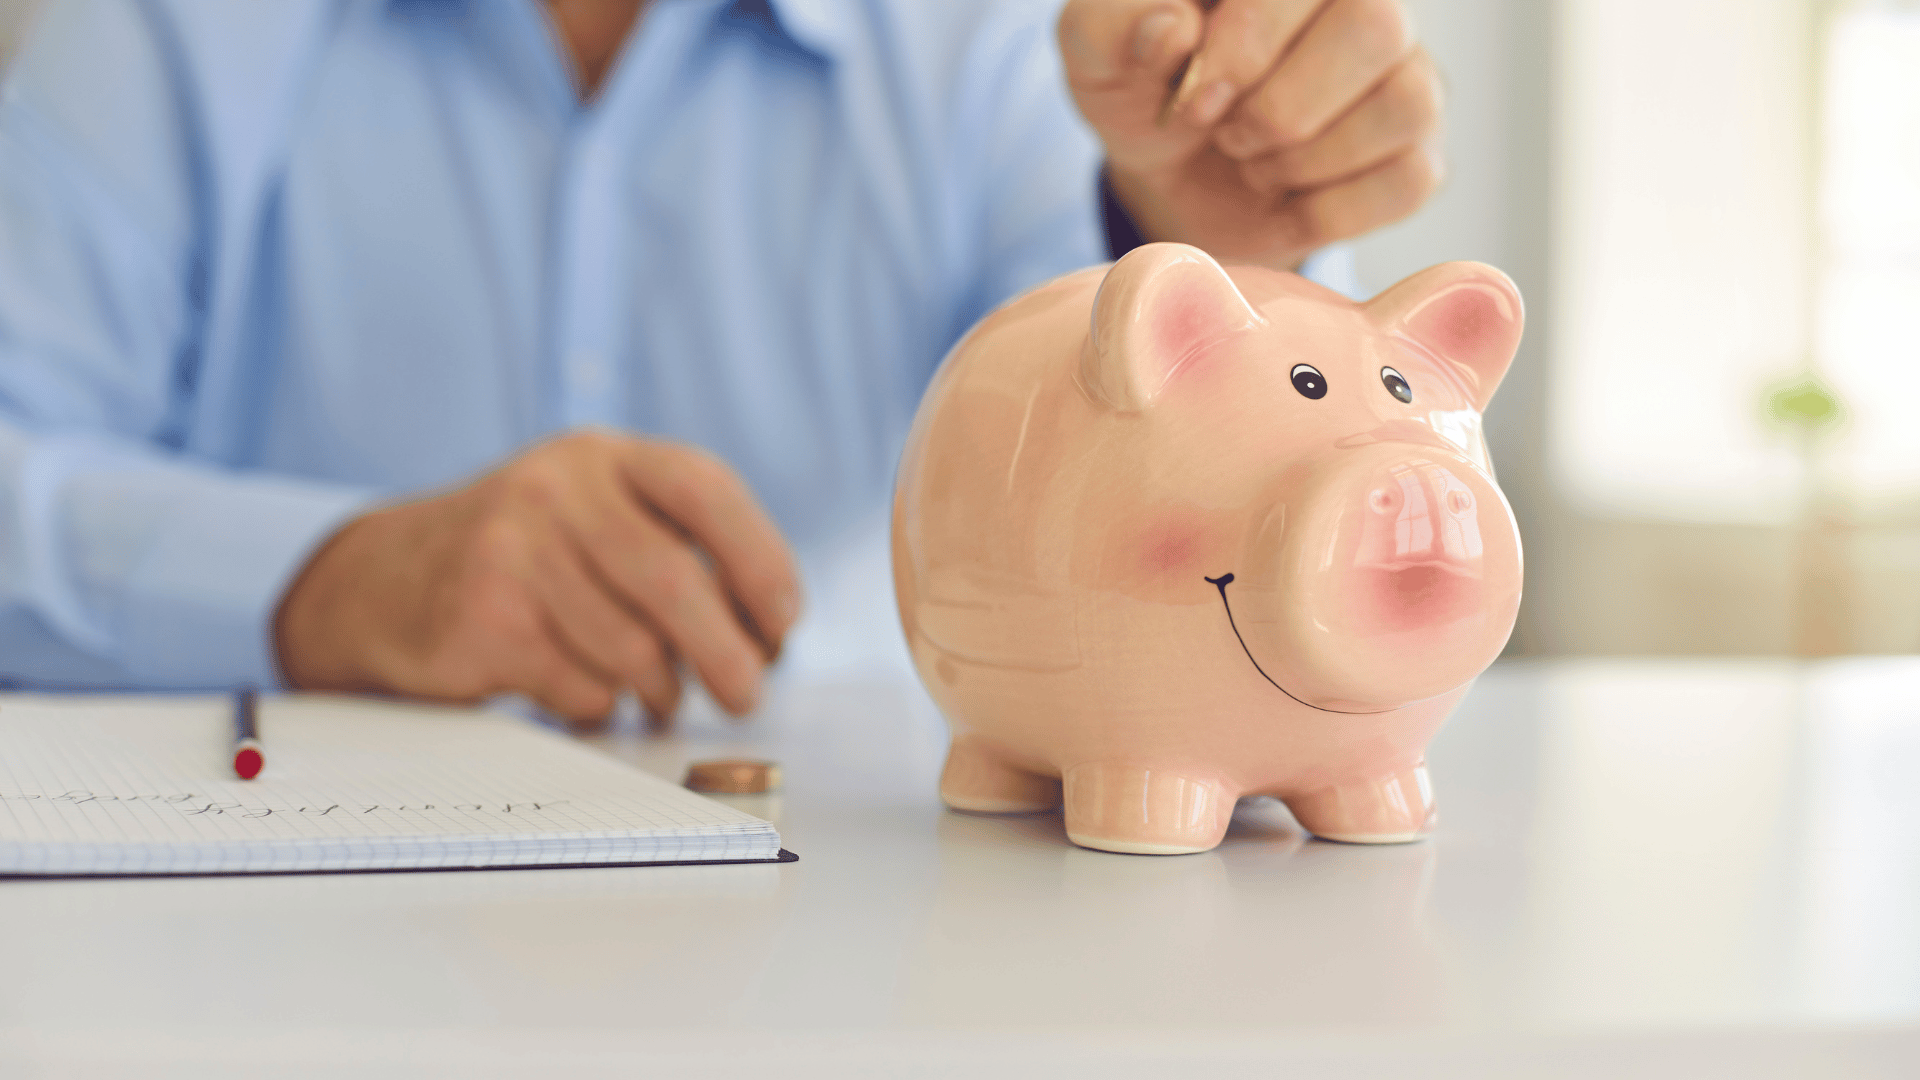 An image of someone saving money in a piggy bank